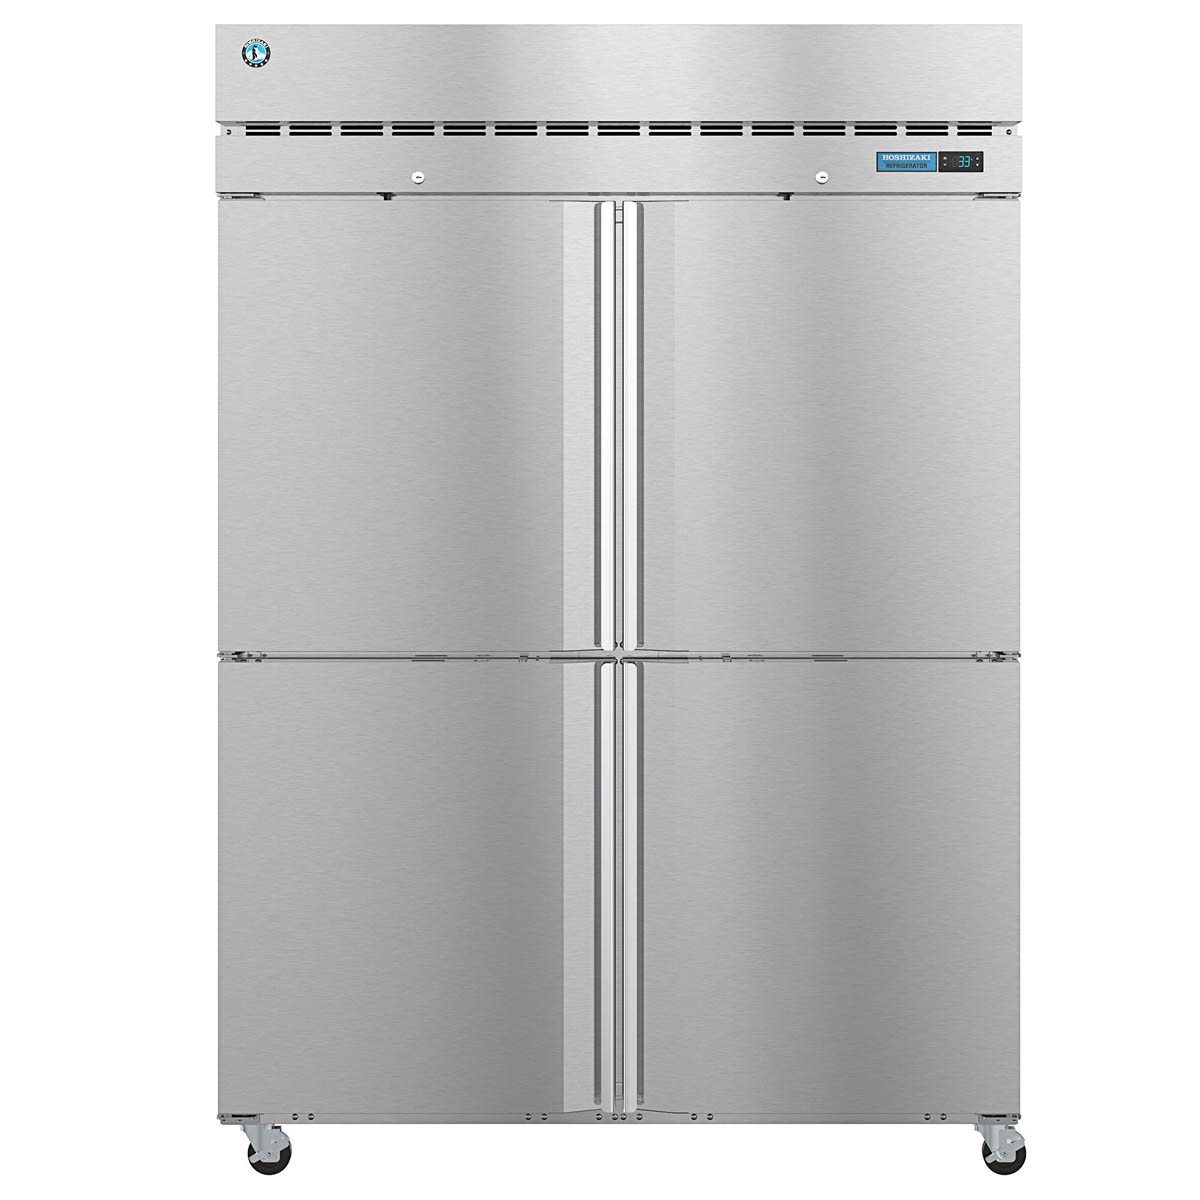 Hoshizaki PT2A-HS-HS Two Section Pass-Thru Refrigerator w/ 8 Solid Half Doors, Top Mount, Stainless Steel, 53 cu. ft.